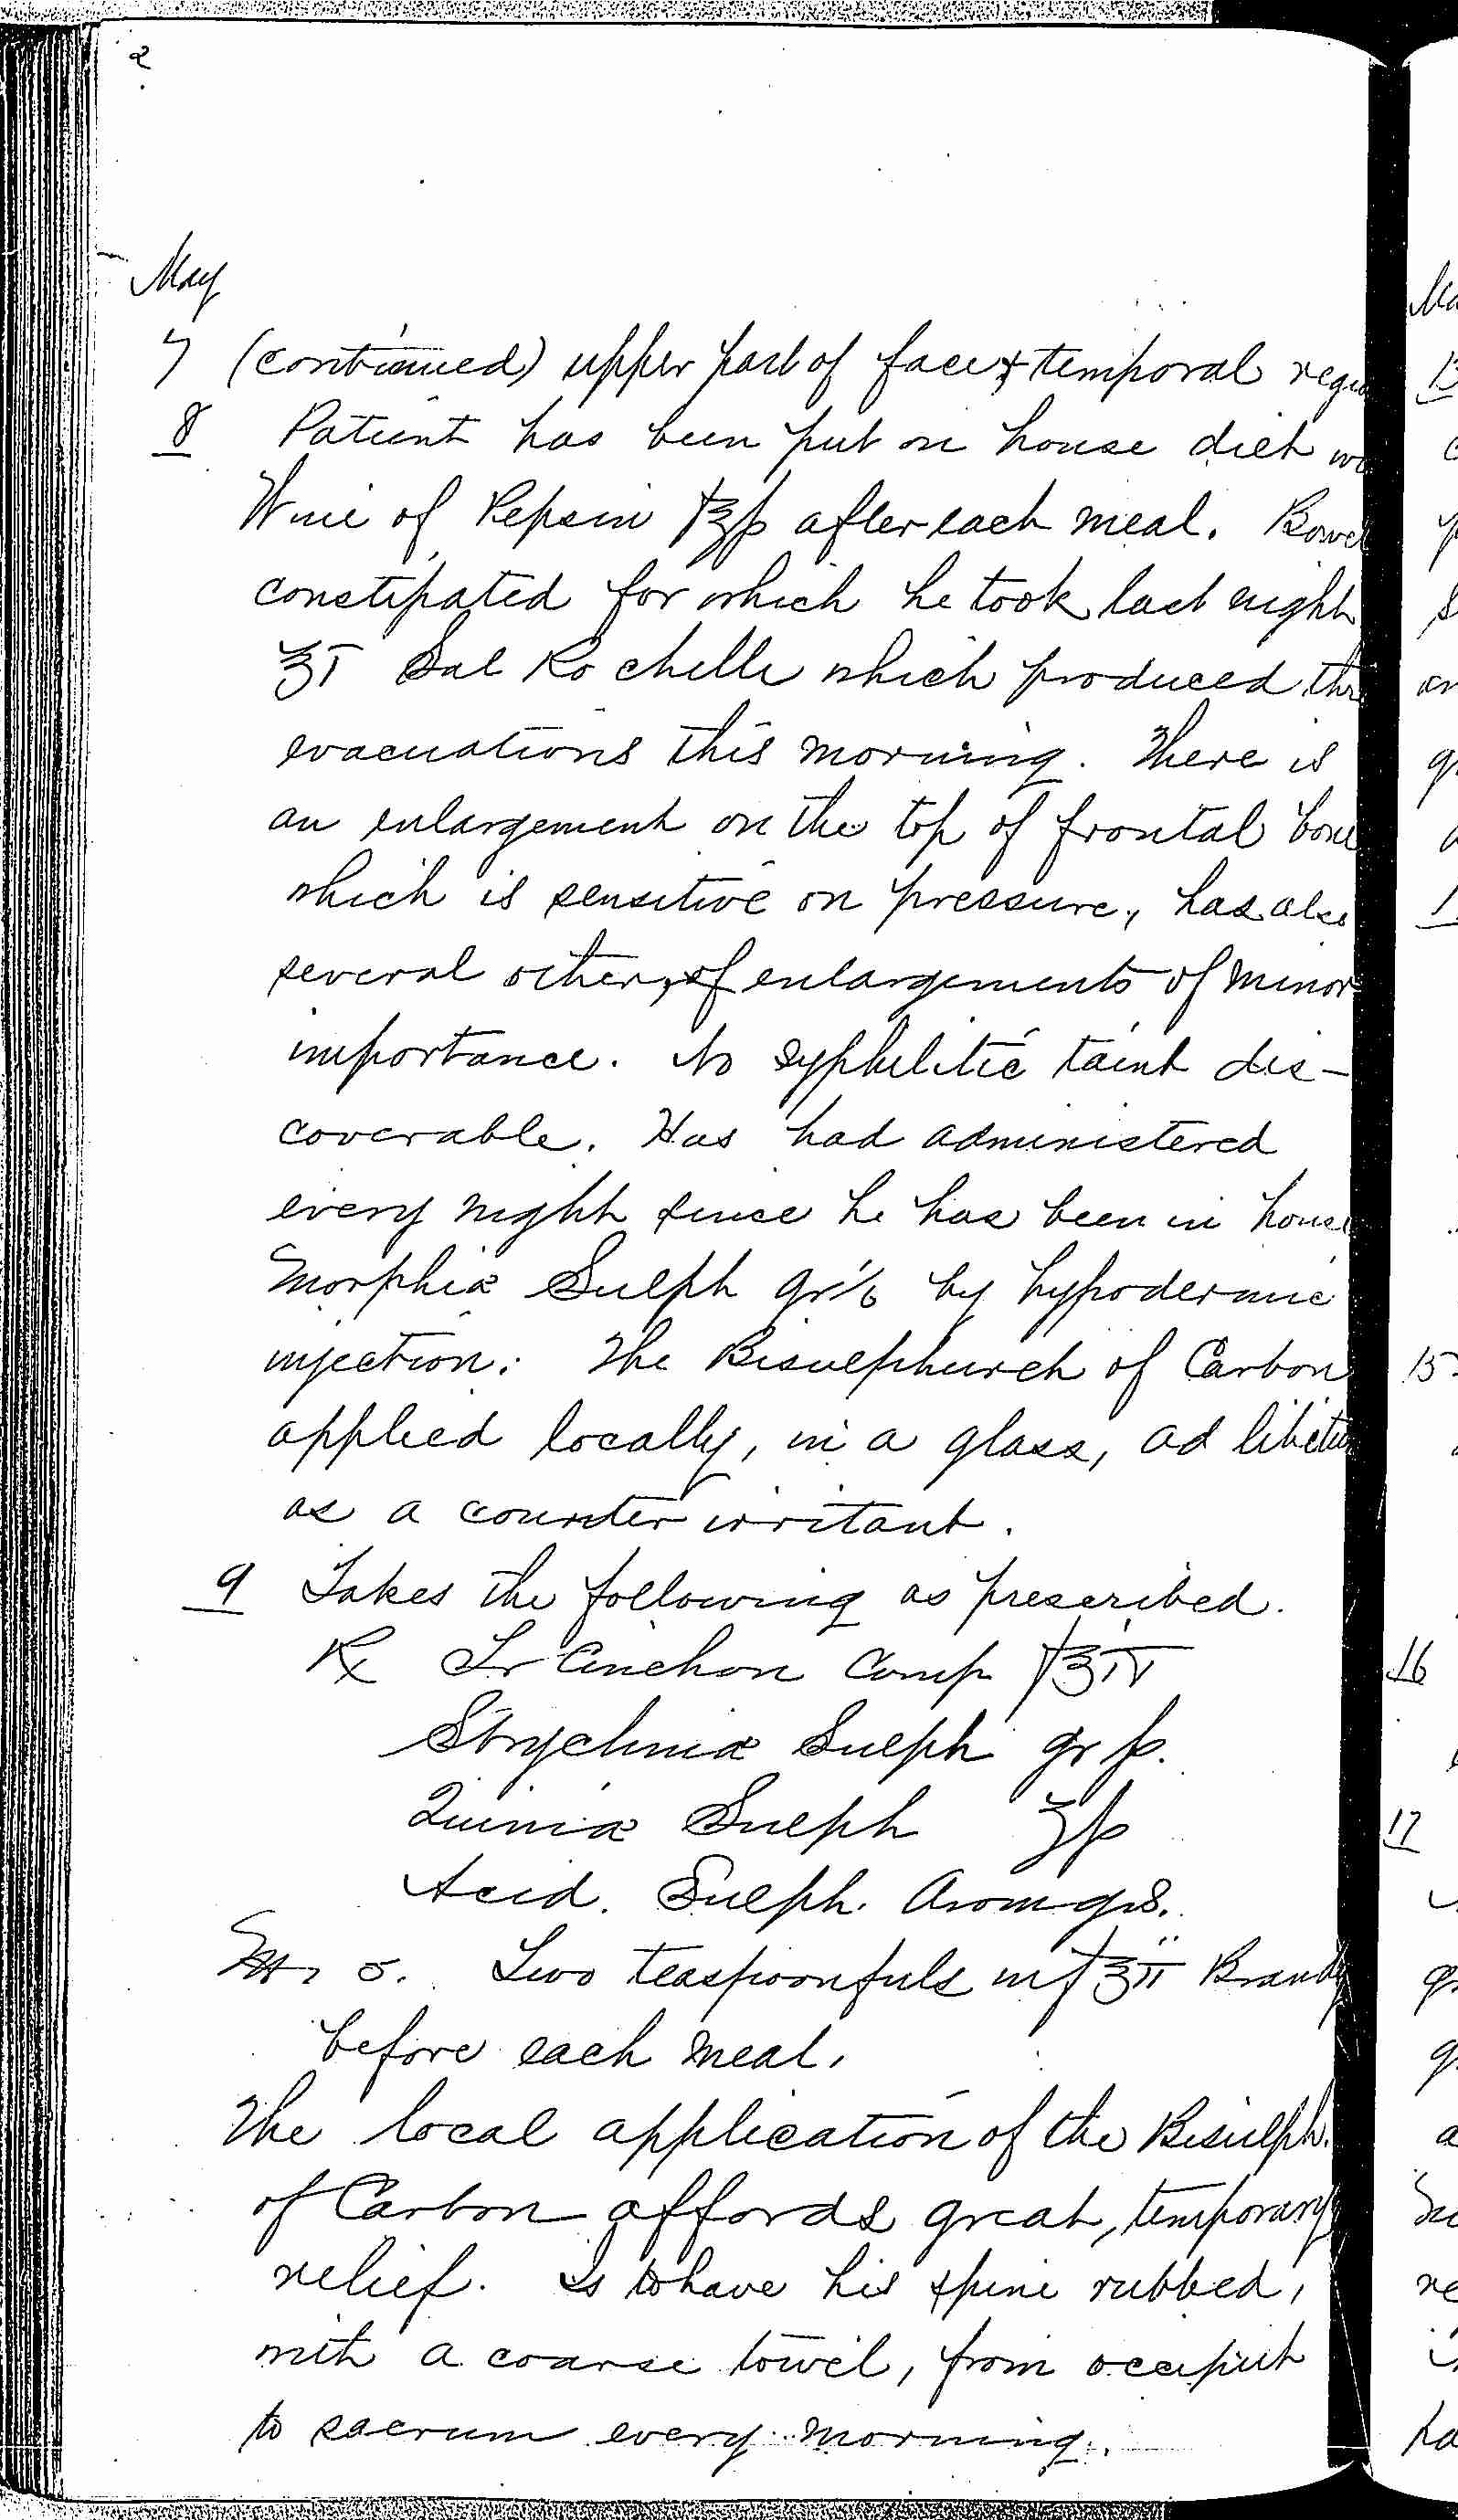 Entry for Edward Williams (page 2 of 6) in the log Hospital Tickets and Case Papers - Naval Hospital - Washington, D.C. - 1868-69